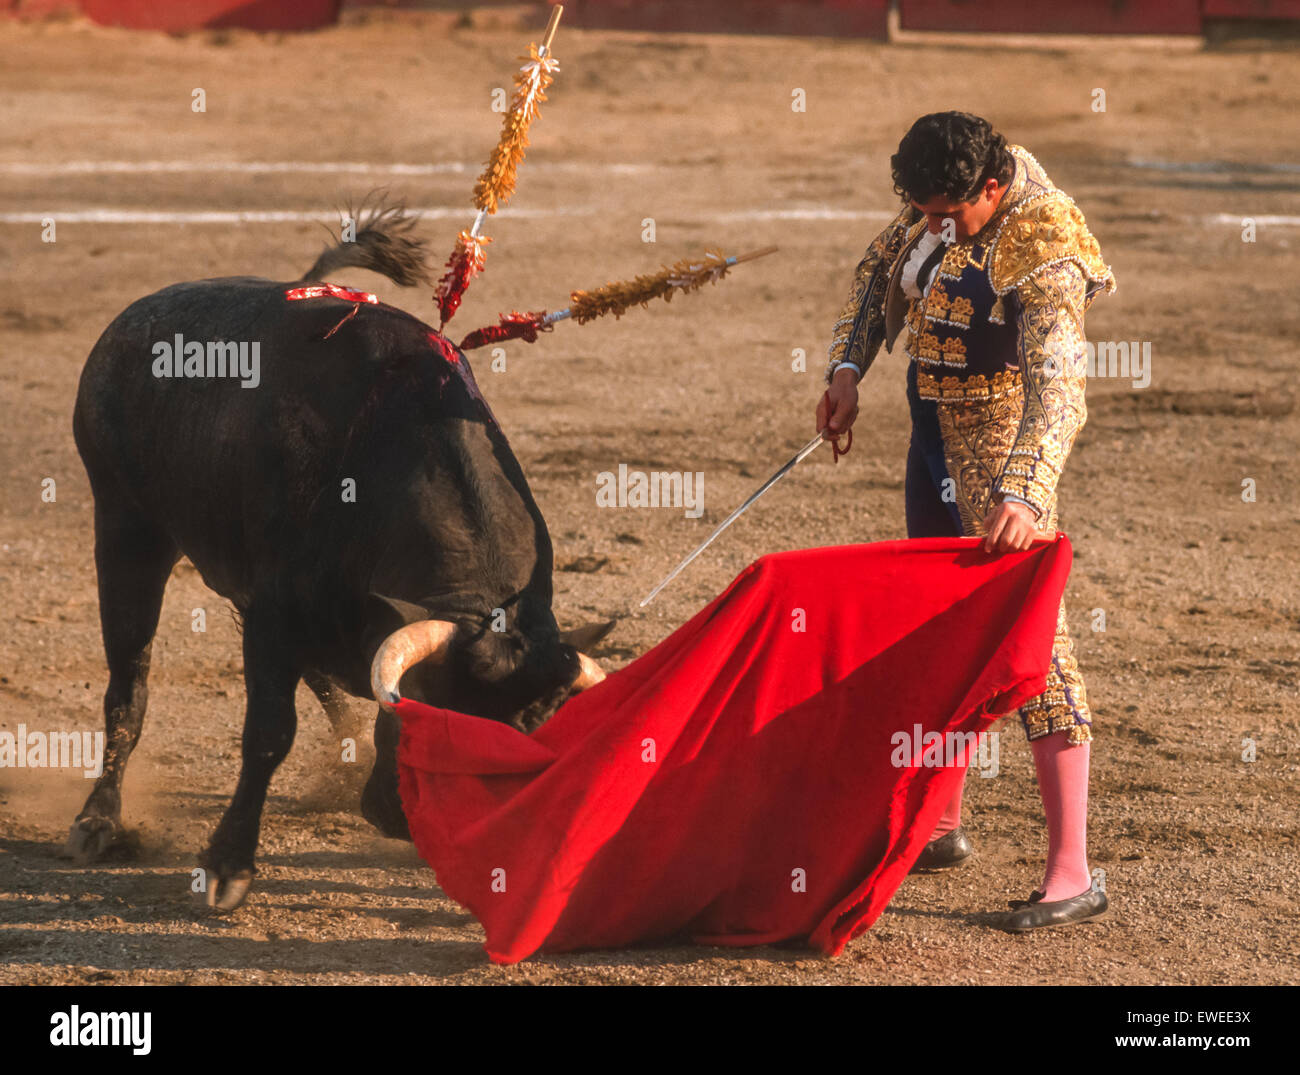 CARACAS, VENEZUELA - Matador waves red cape in front of bull during bullfight in arena. 1988 Stock Photo